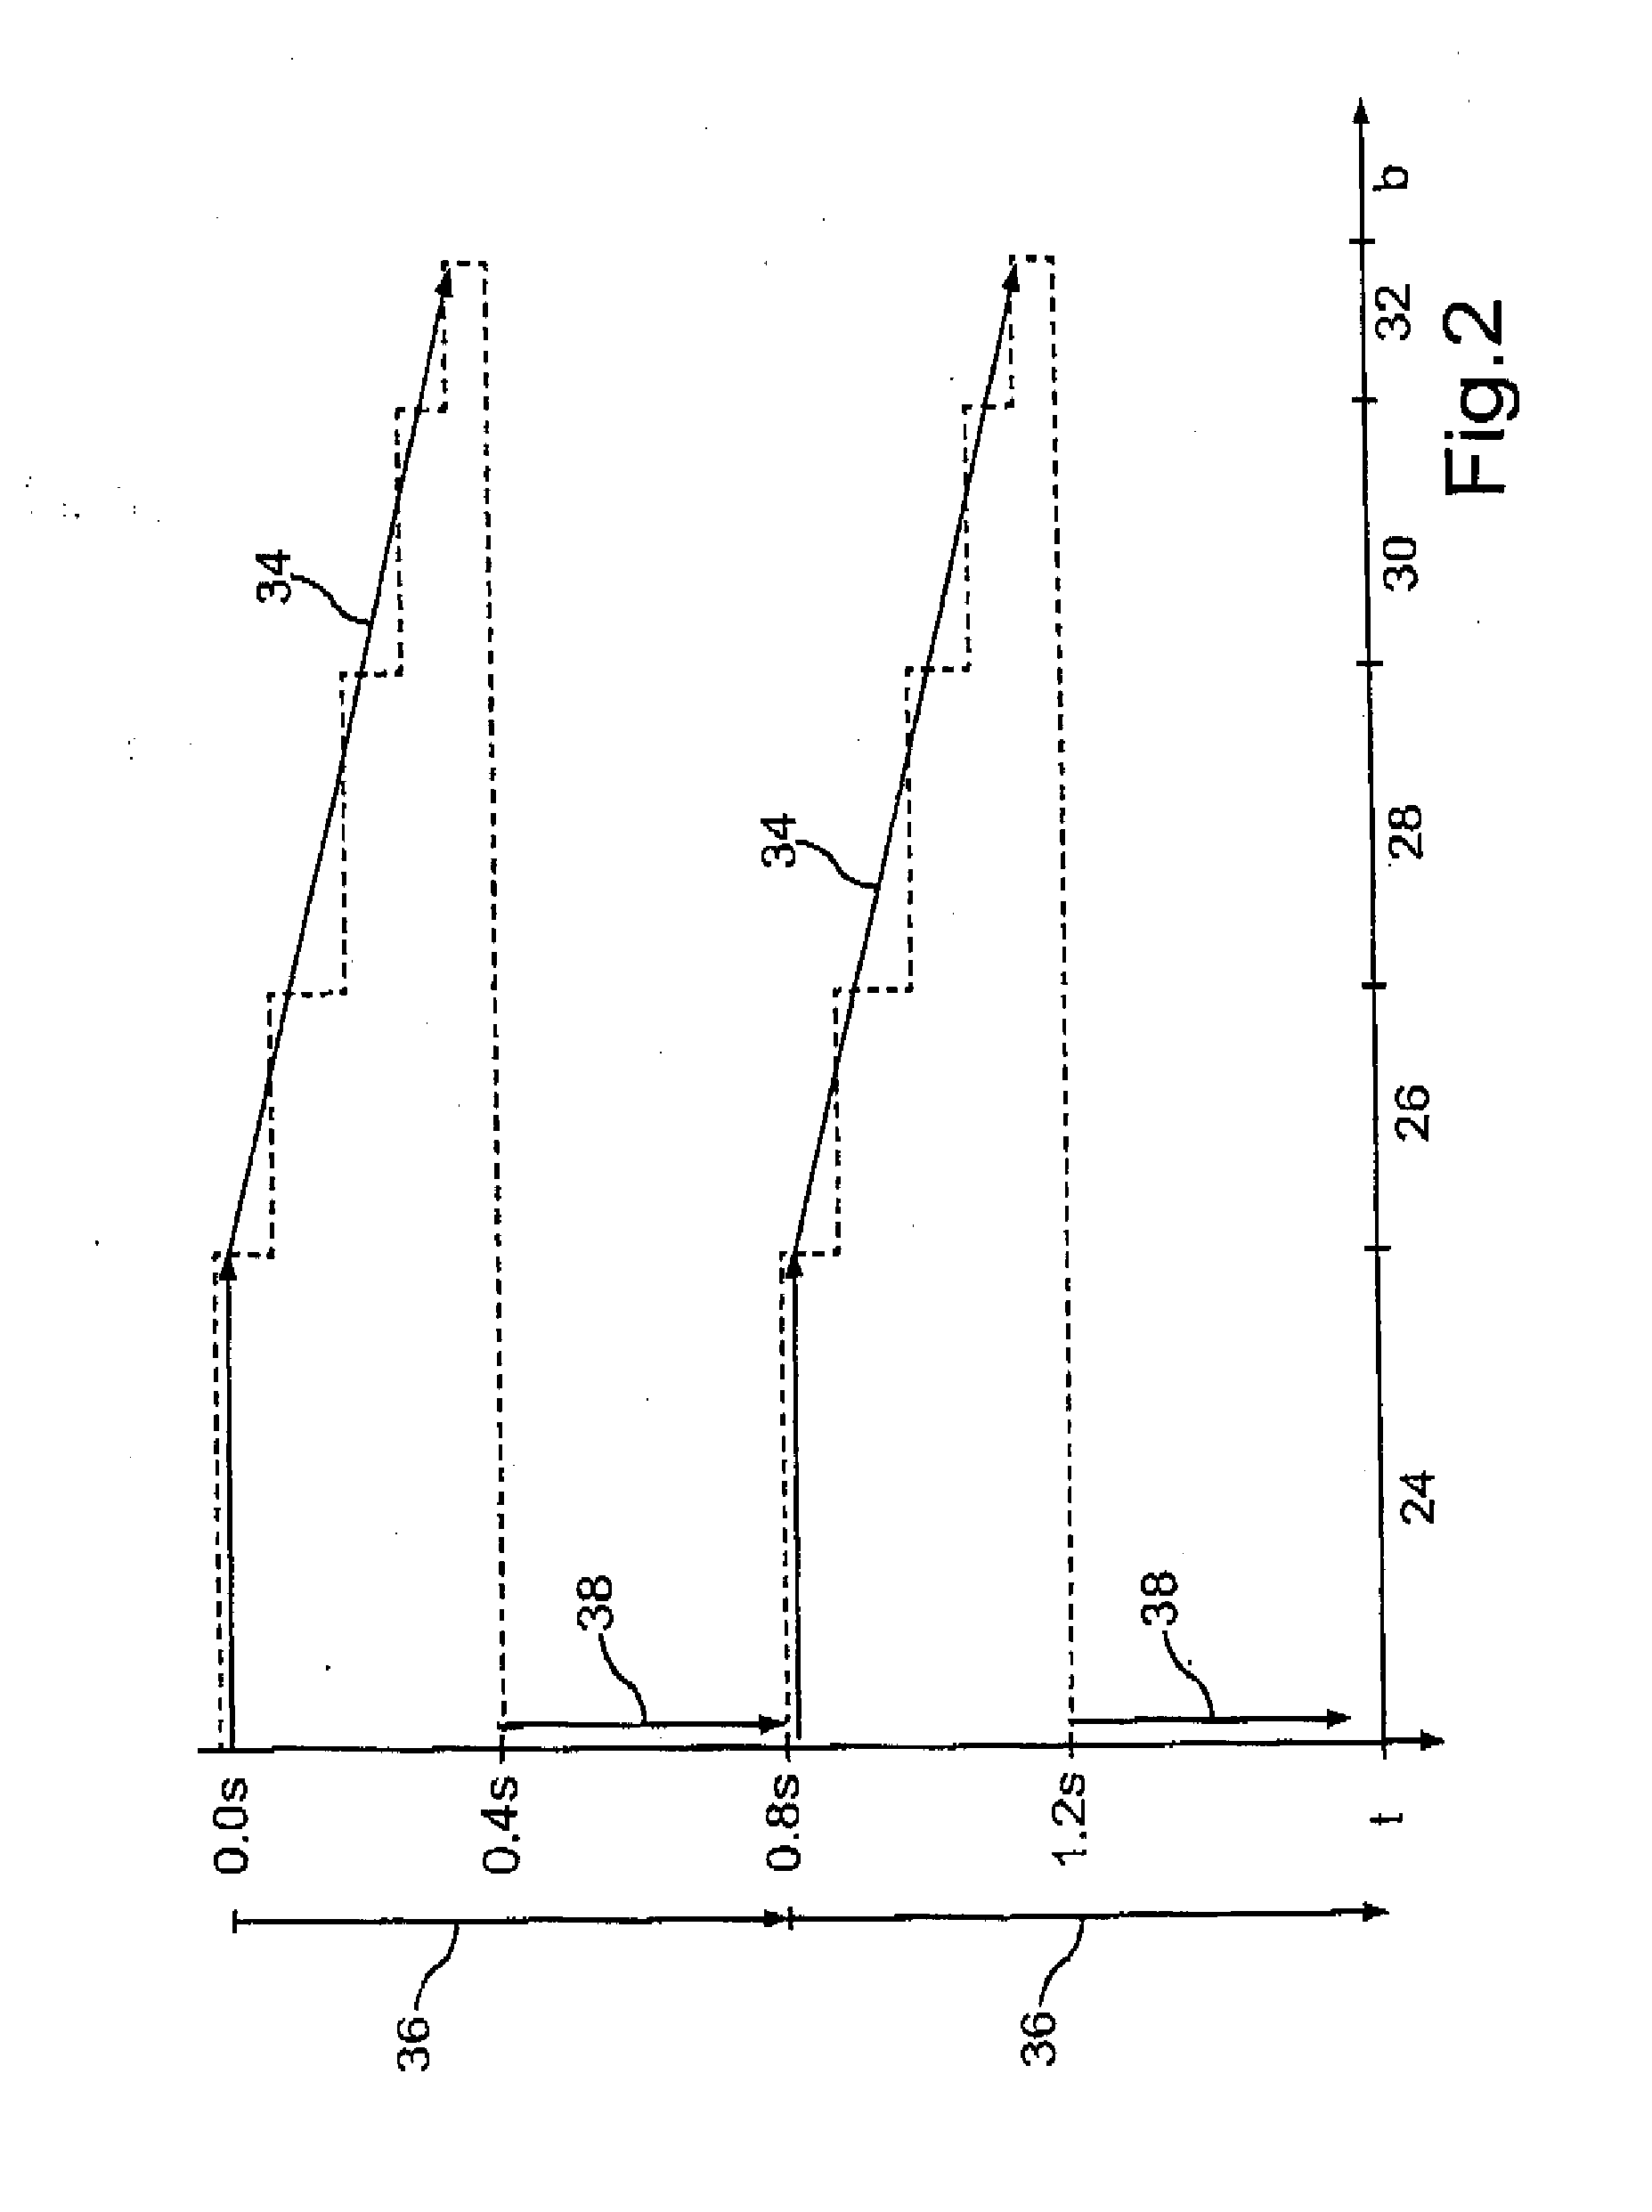 Turn signal lighting system for a motor vehicle, and method of operating a turn signal lighting system